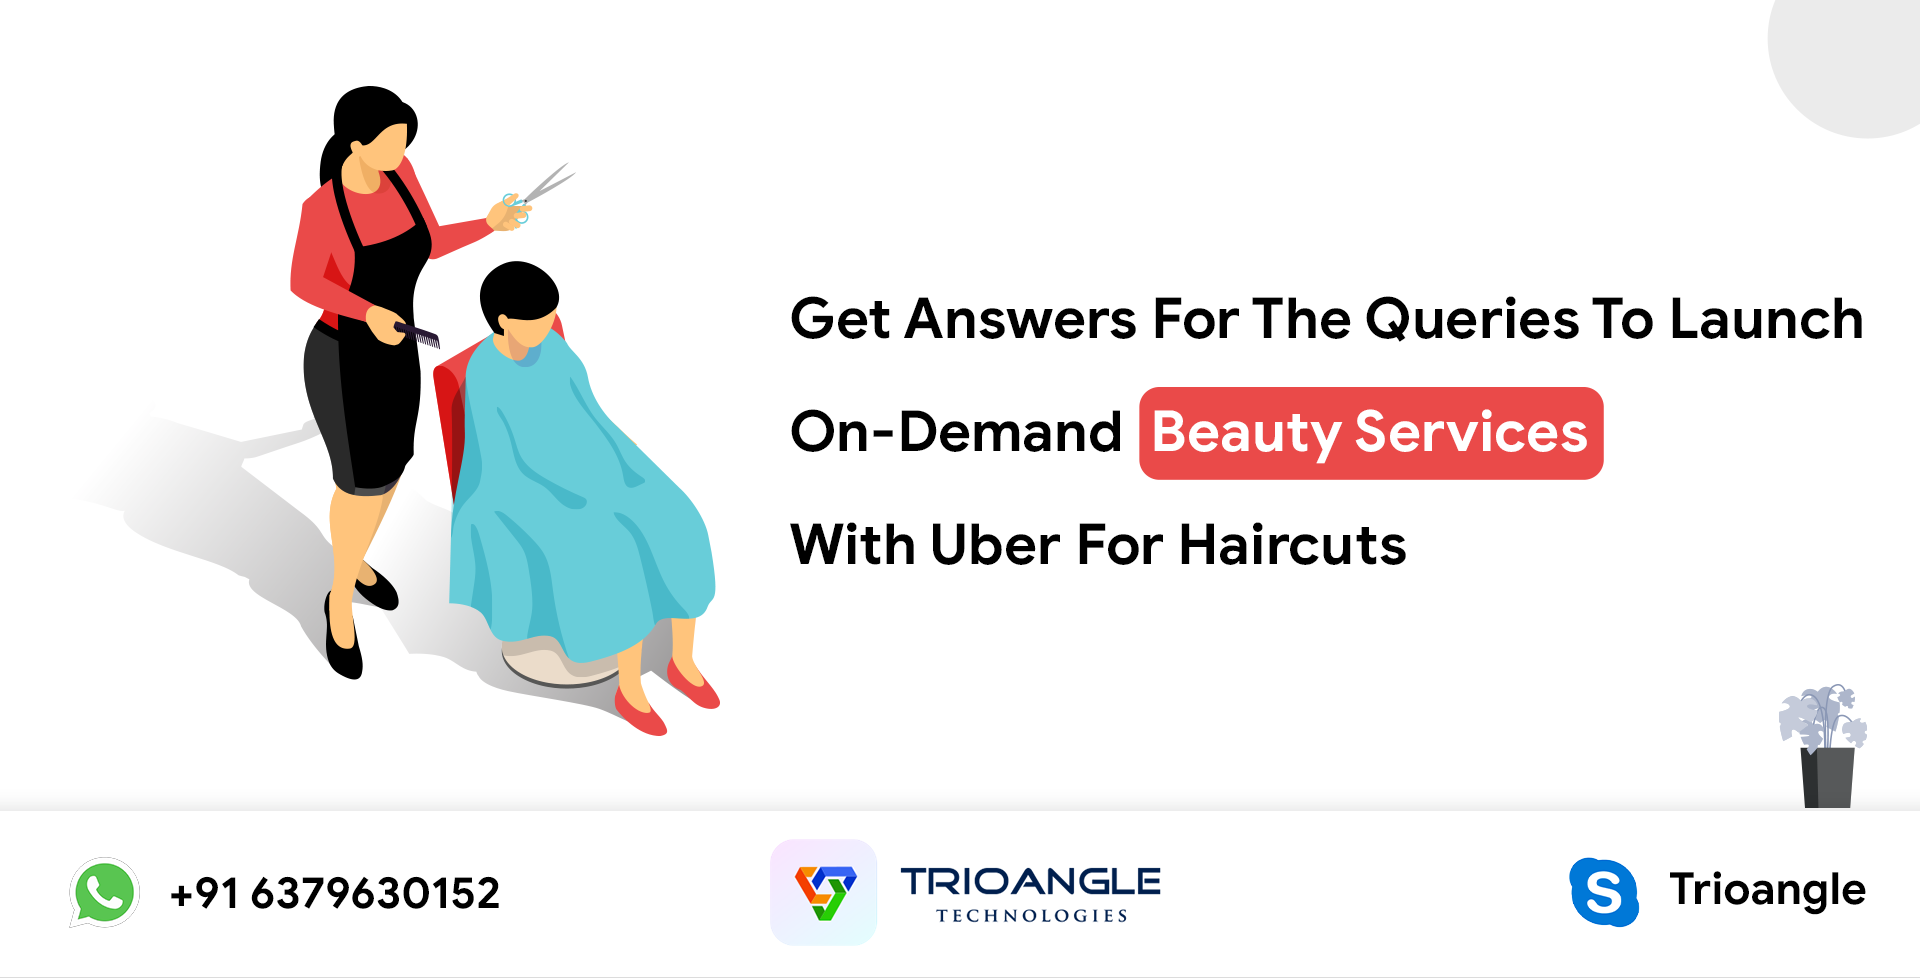 Get Answers For The Queries To Launch On-Demand Beauty Services With Uber For Haircuts